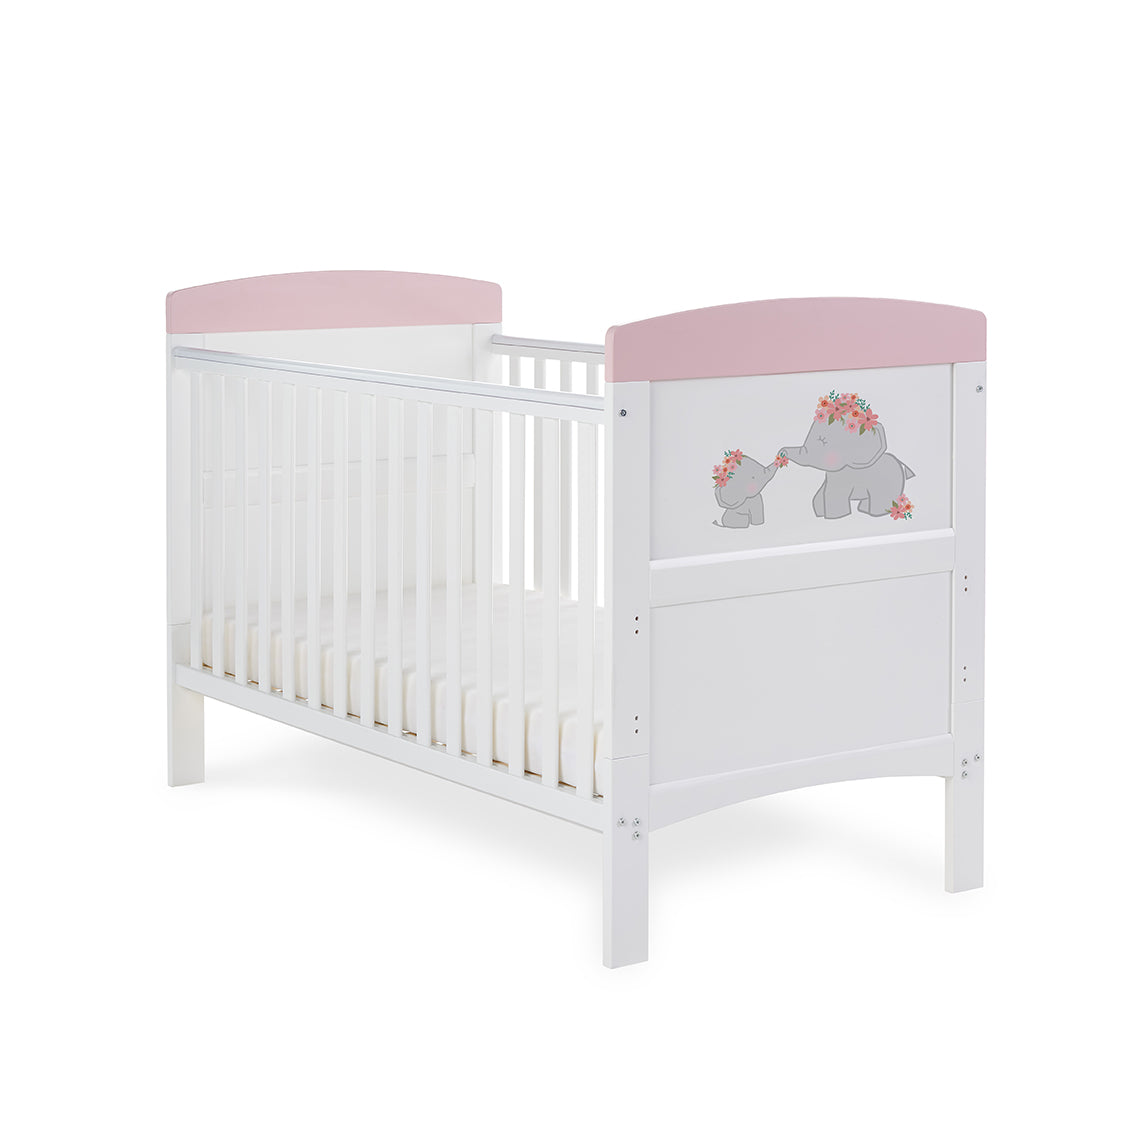 Obaby Grace Inspire Cot Bed & Fibre Mattress – Me & Mini Me Elephants – Pink -  | For Your Little One